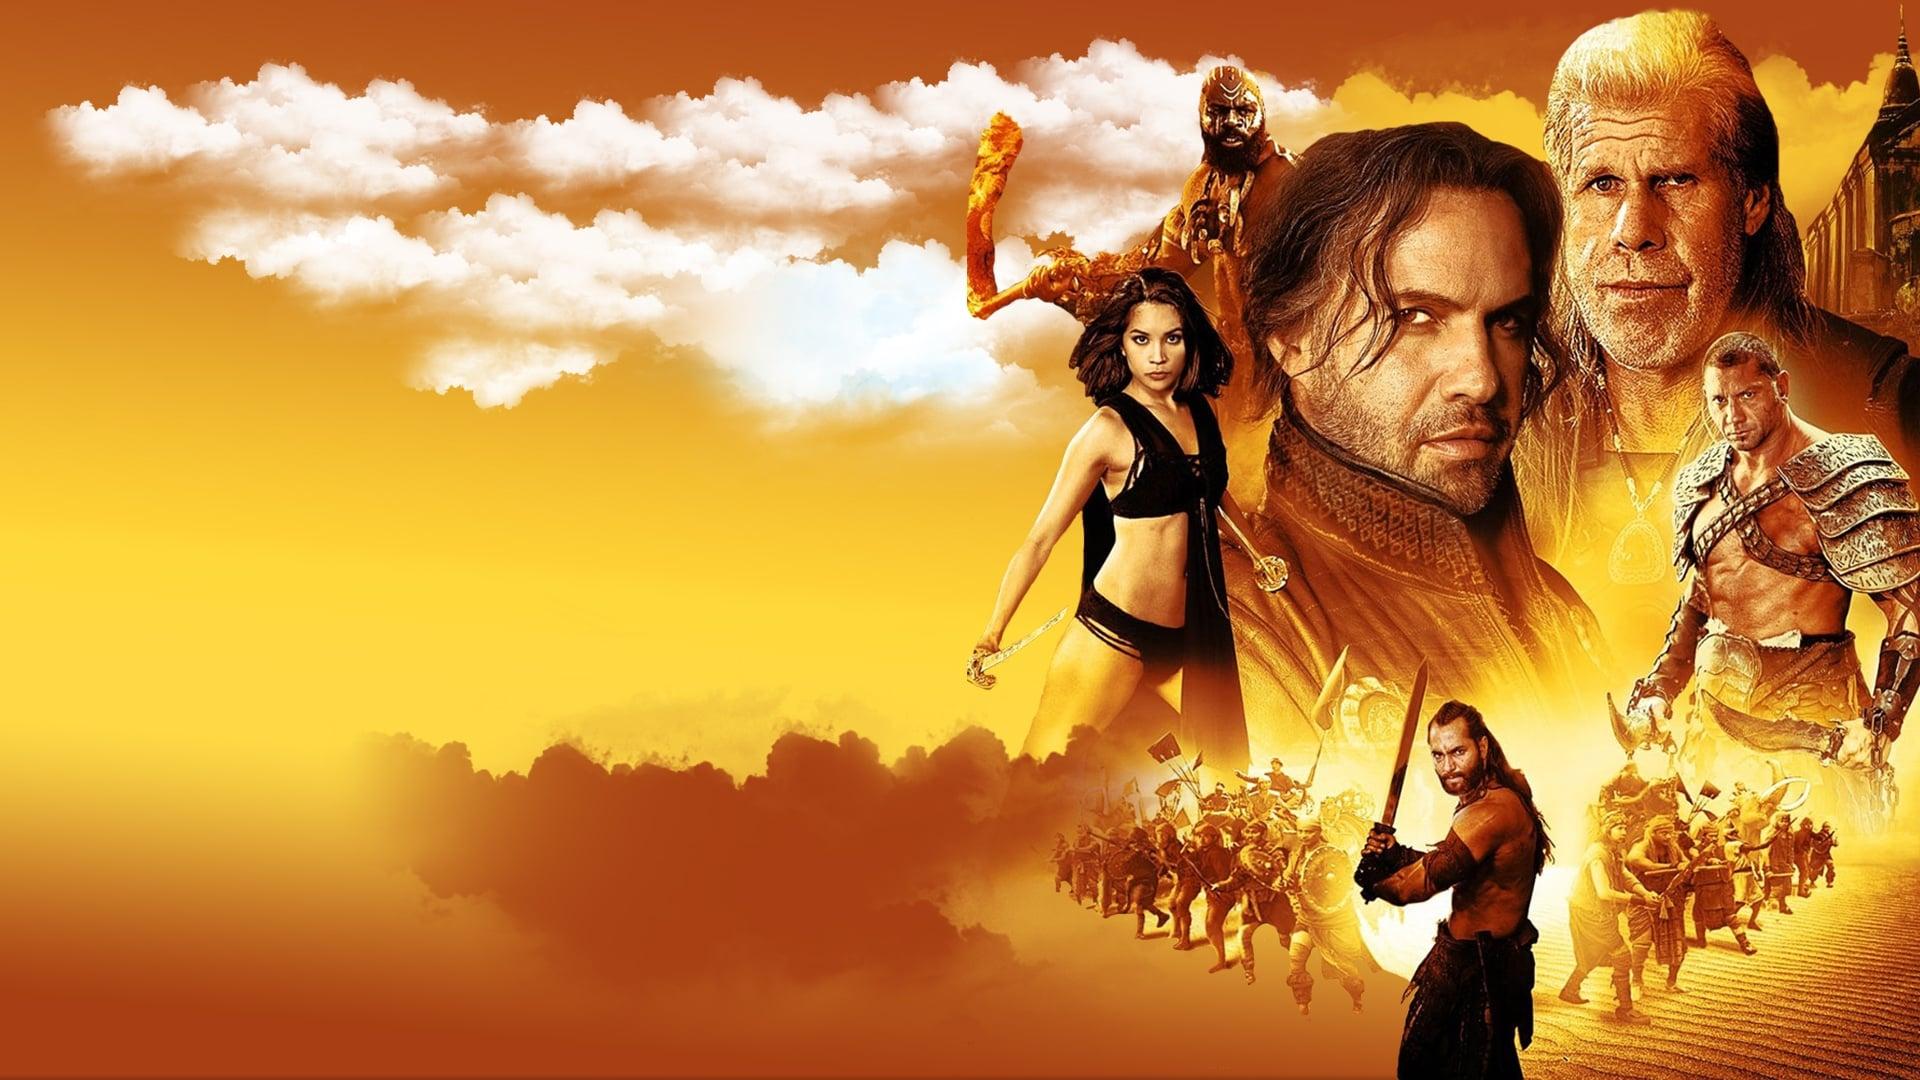 The Scorpion King 3: Battle for Redemption backdrop